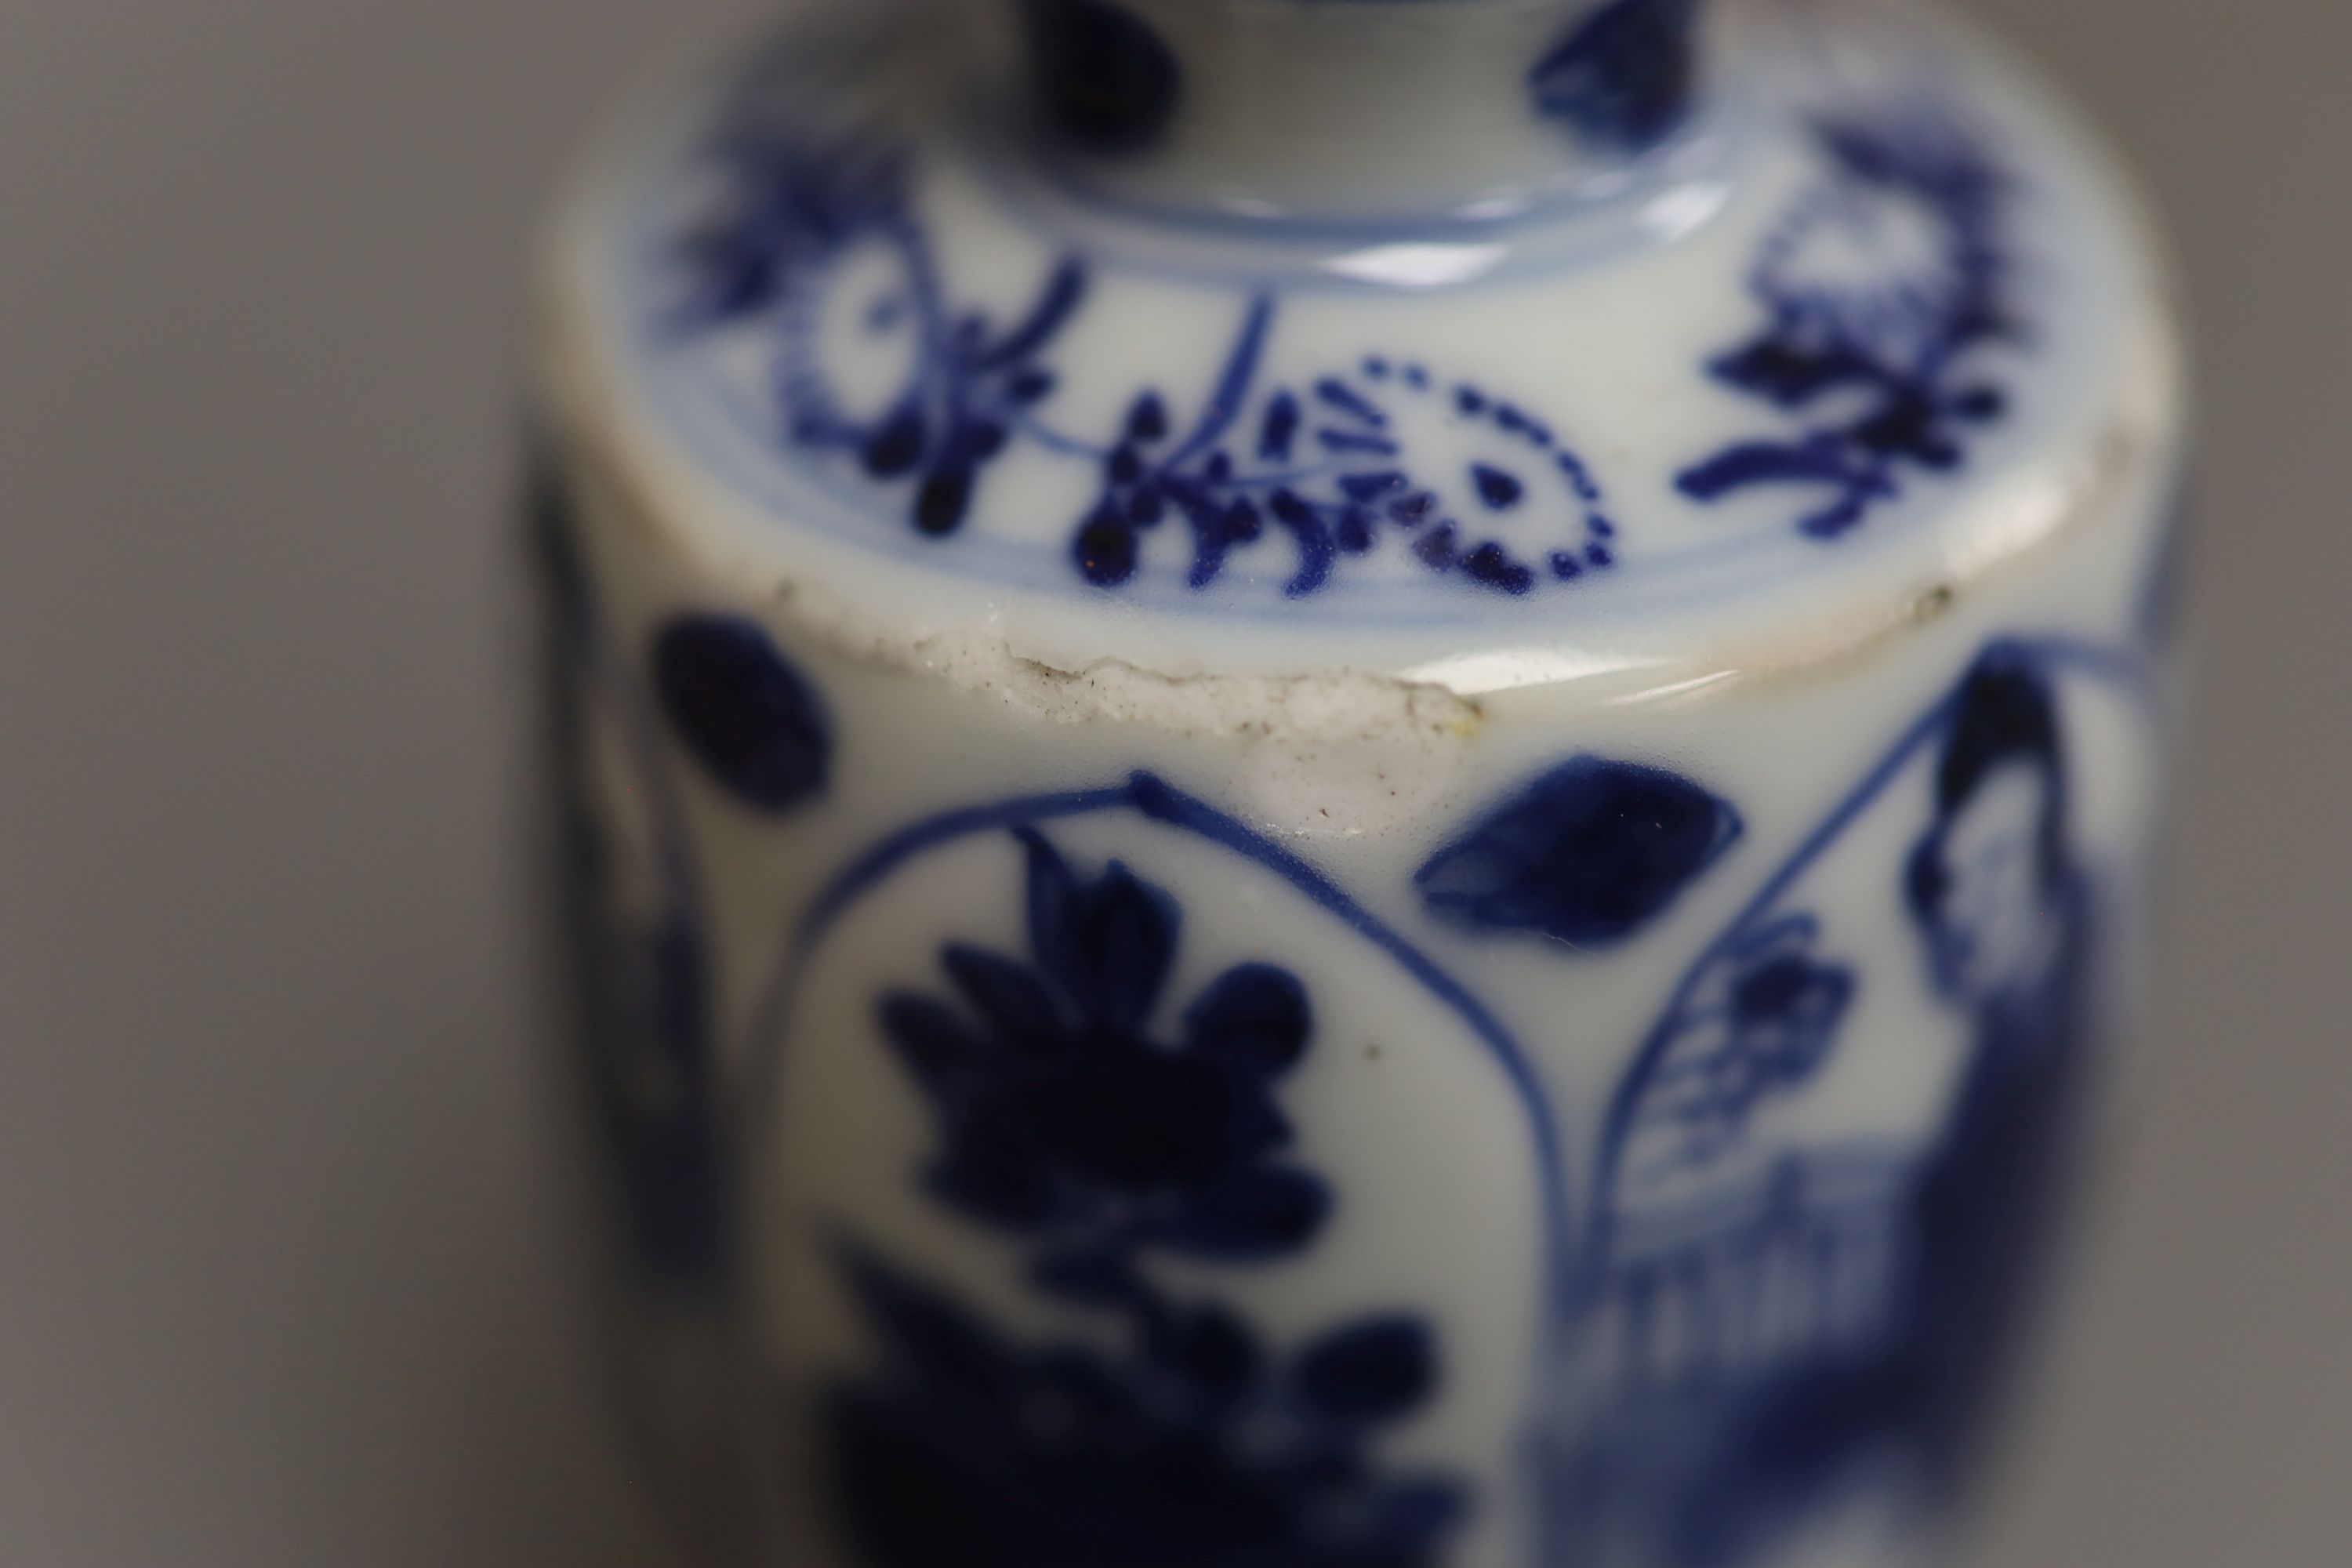 A Chinese Kangxi blue and white vase, ‘Jade’ mark to base, height 13cm